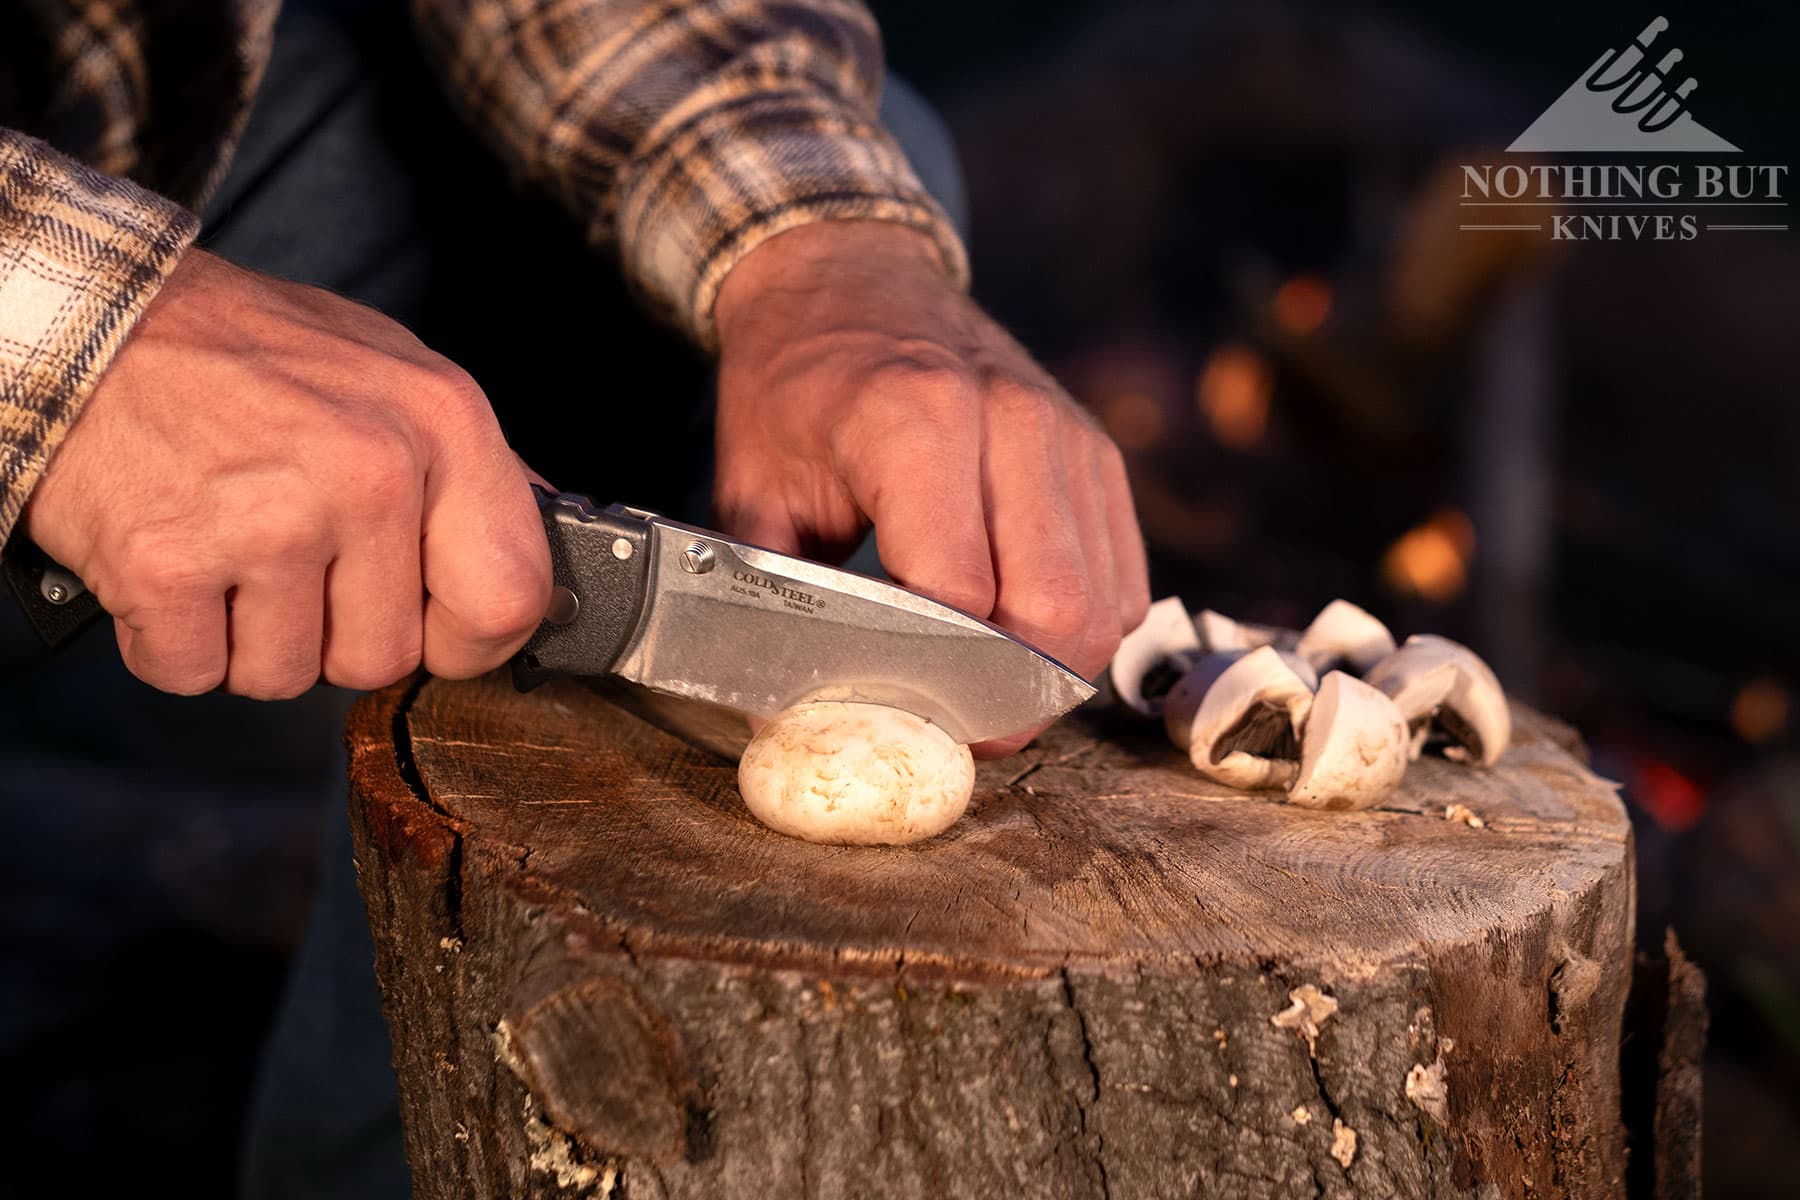 Slicing mushrooms at a campsite with the 4-MAX Scout pocket knife.